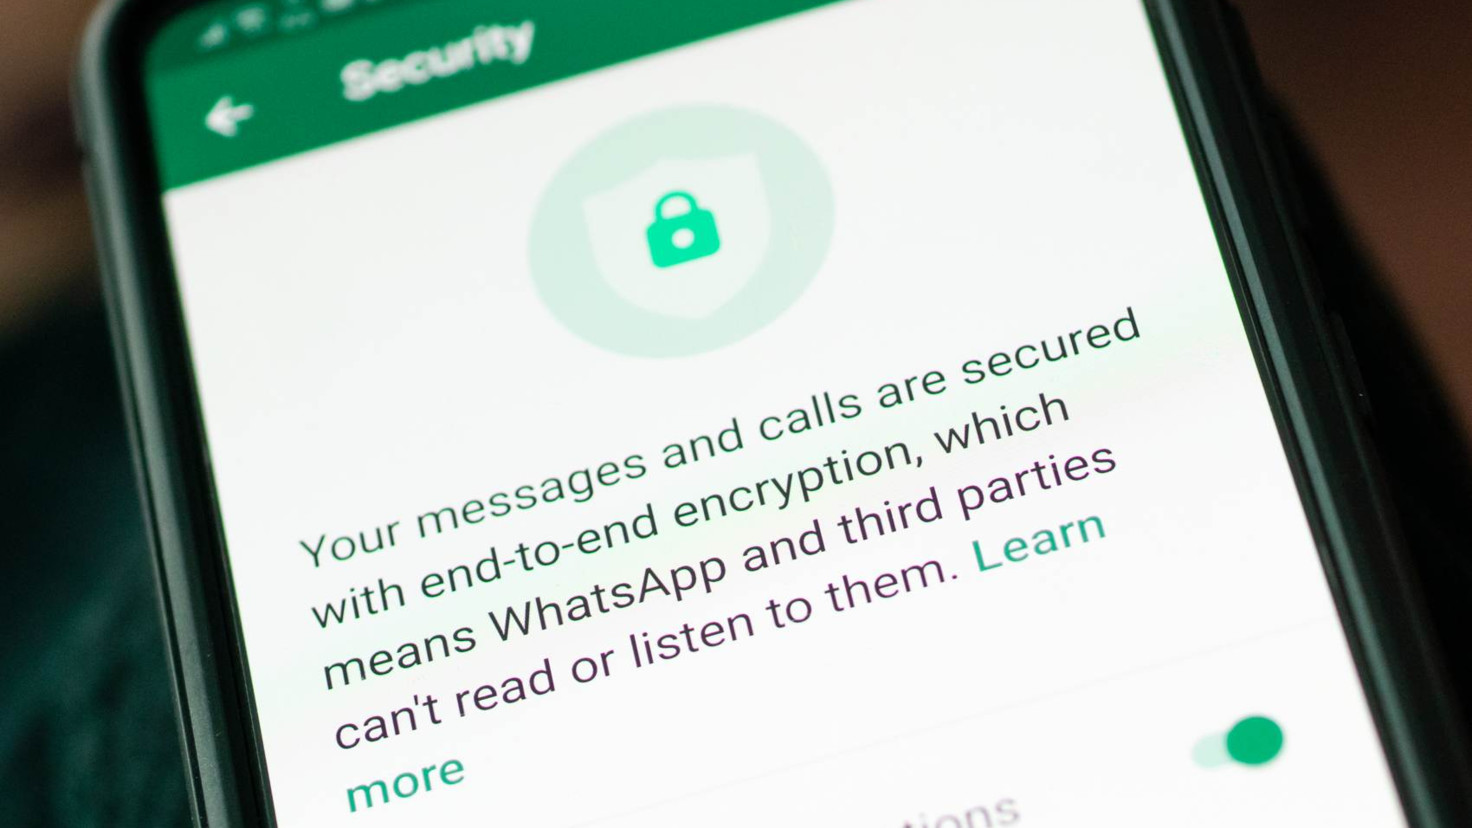 WhatsApp sues Israeli firm over smartphone hacking claims